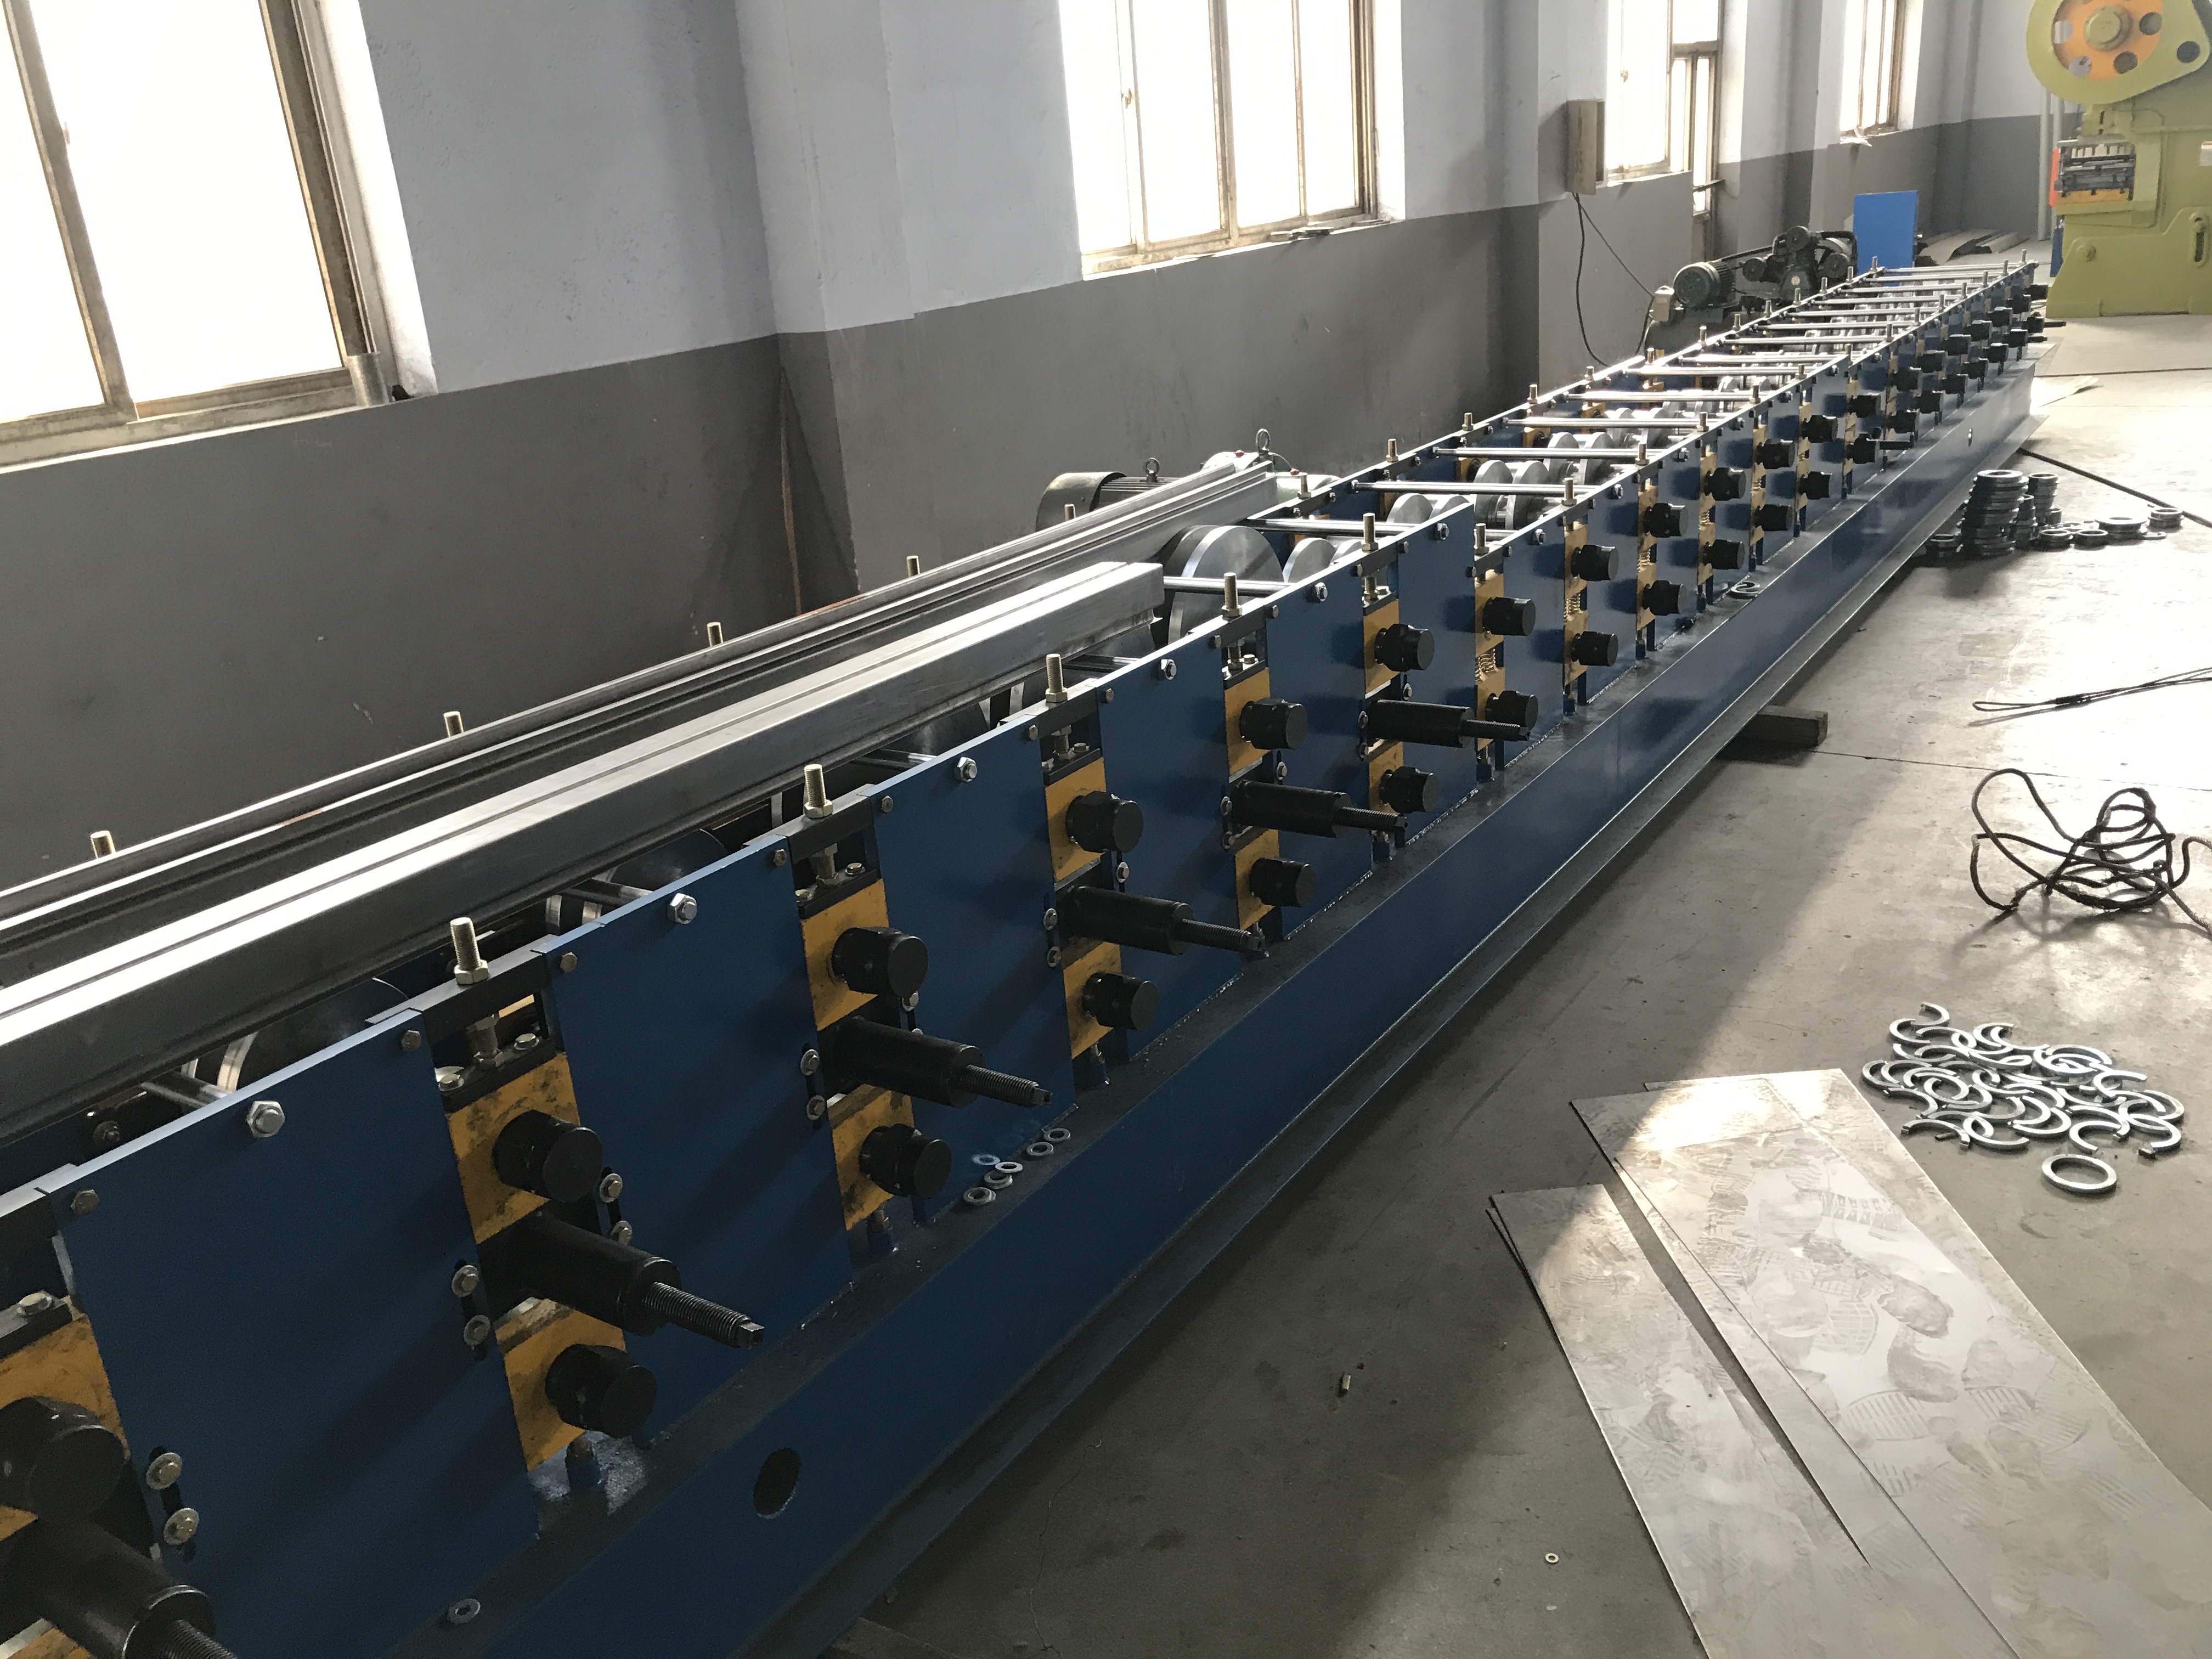 The shelves upright pillar roll forming machine is unders making